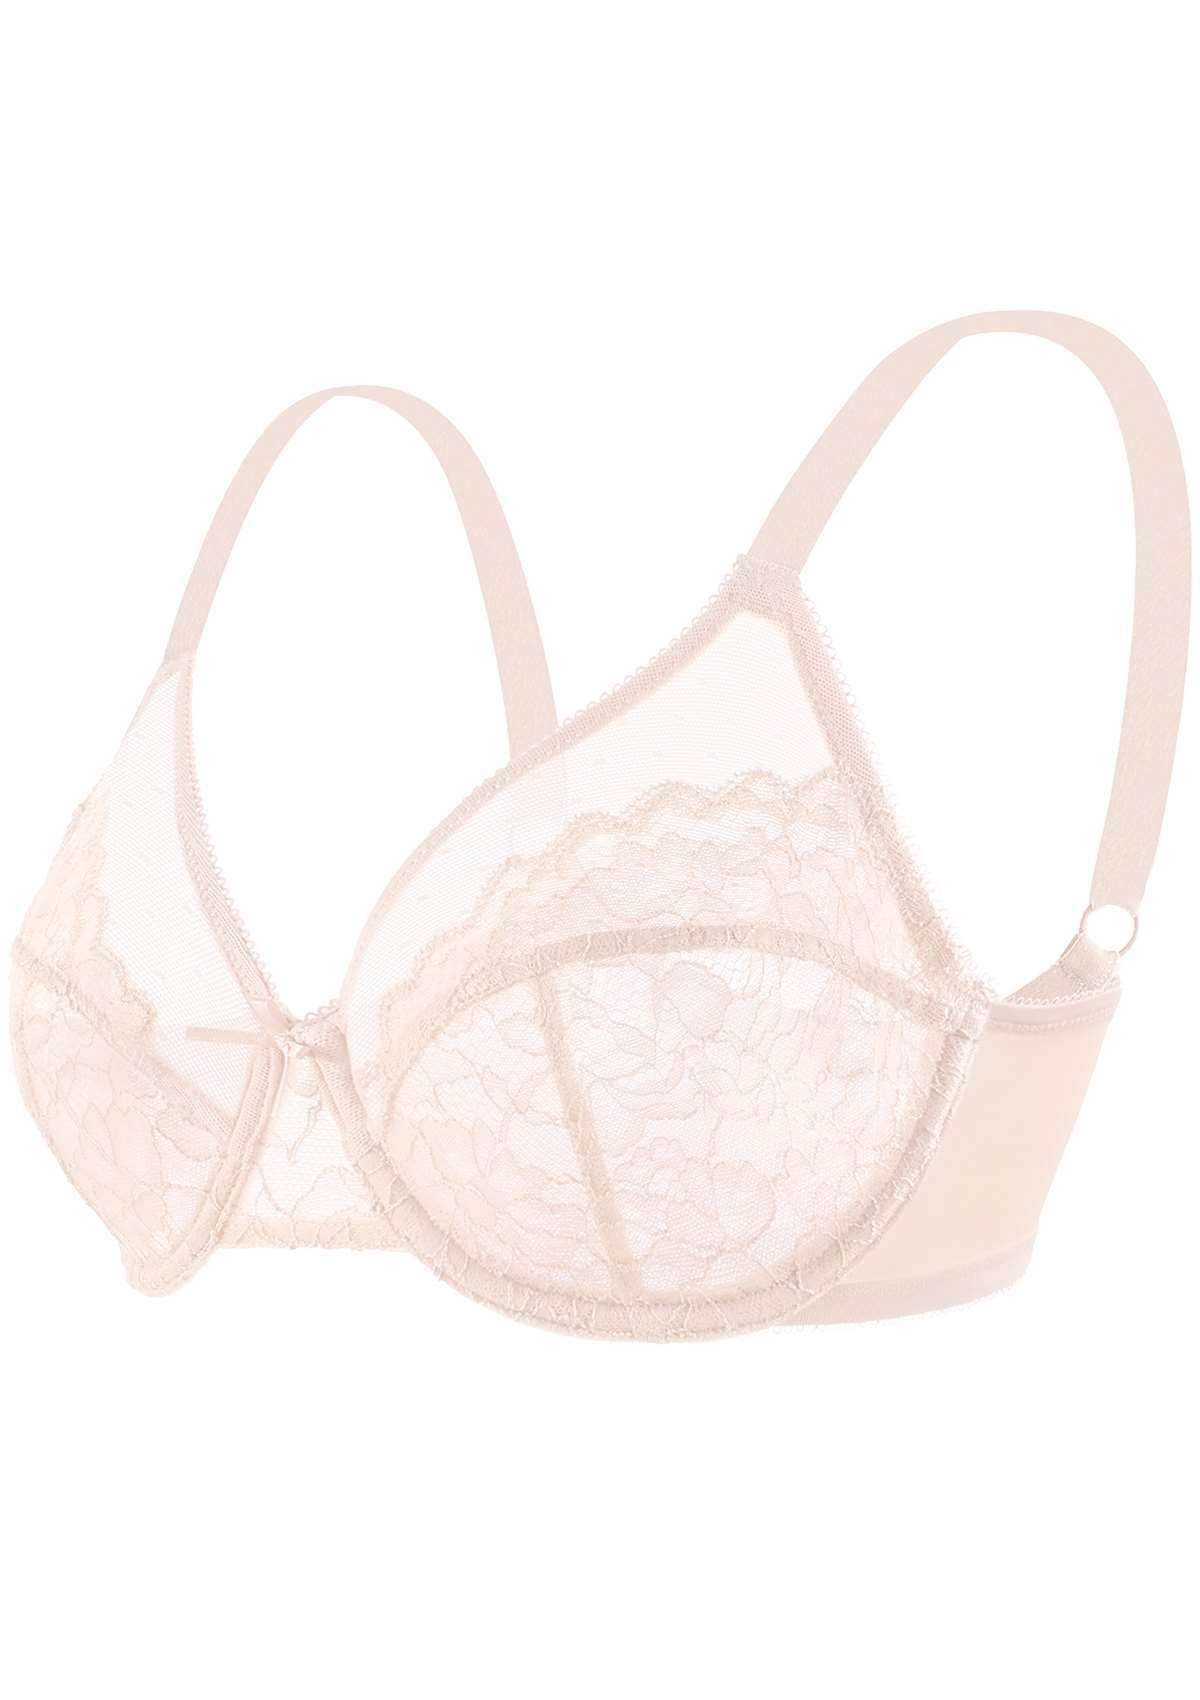 HSIA Enchante Lacy Bra: Comfy Sheer Lace Bra With Lift - Pink / 44 / DD/E